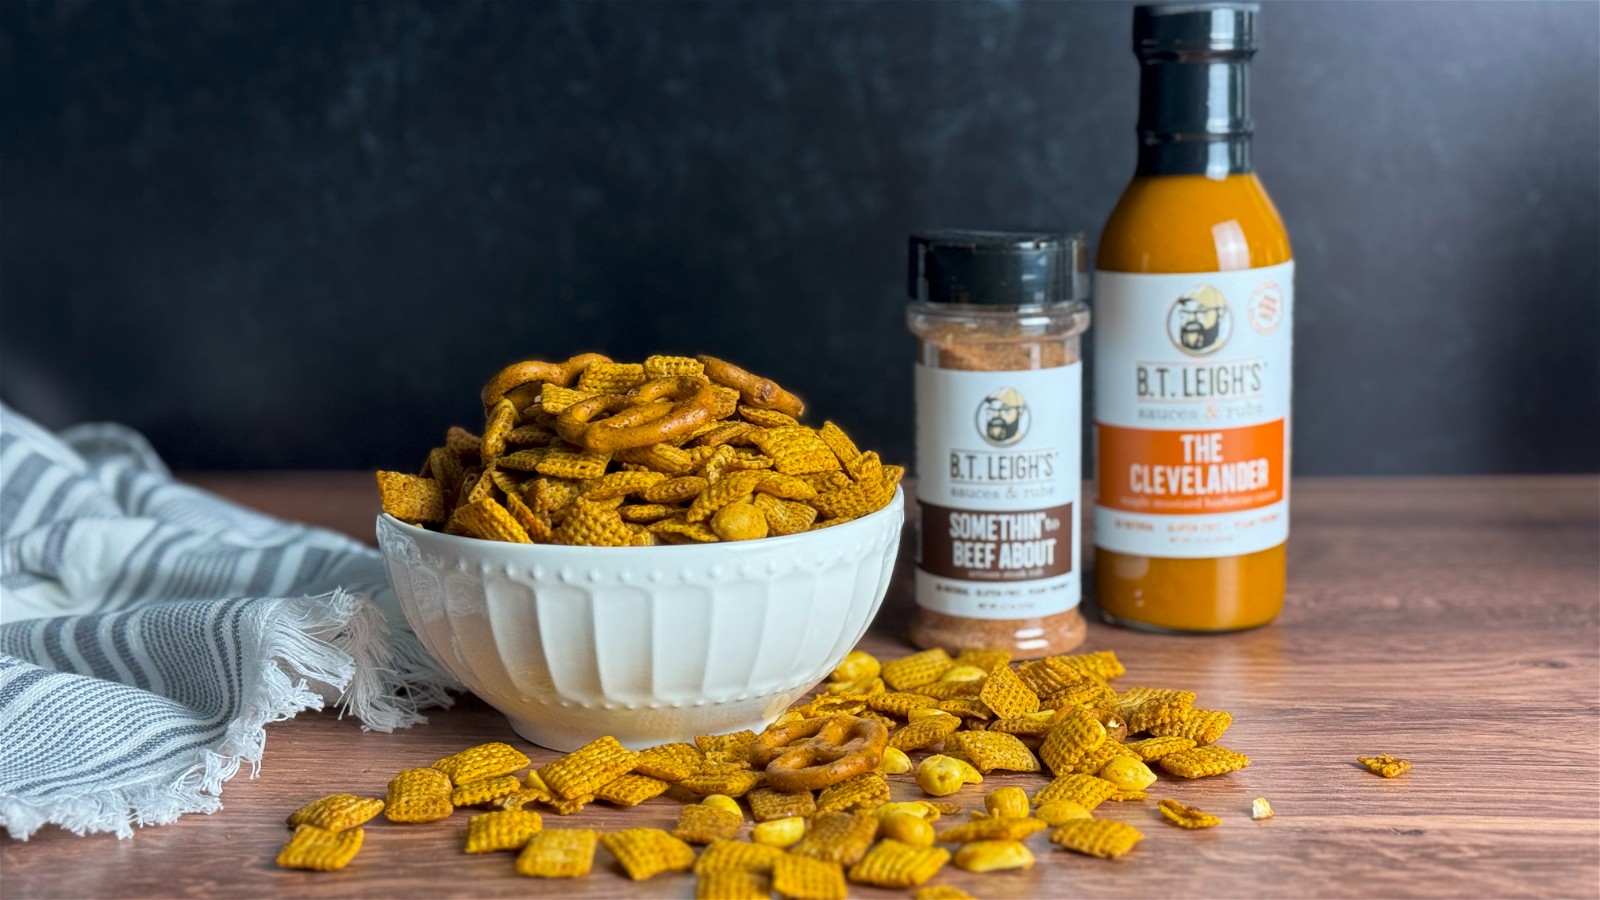 Image of Seasoned Barbecue Snack Mix